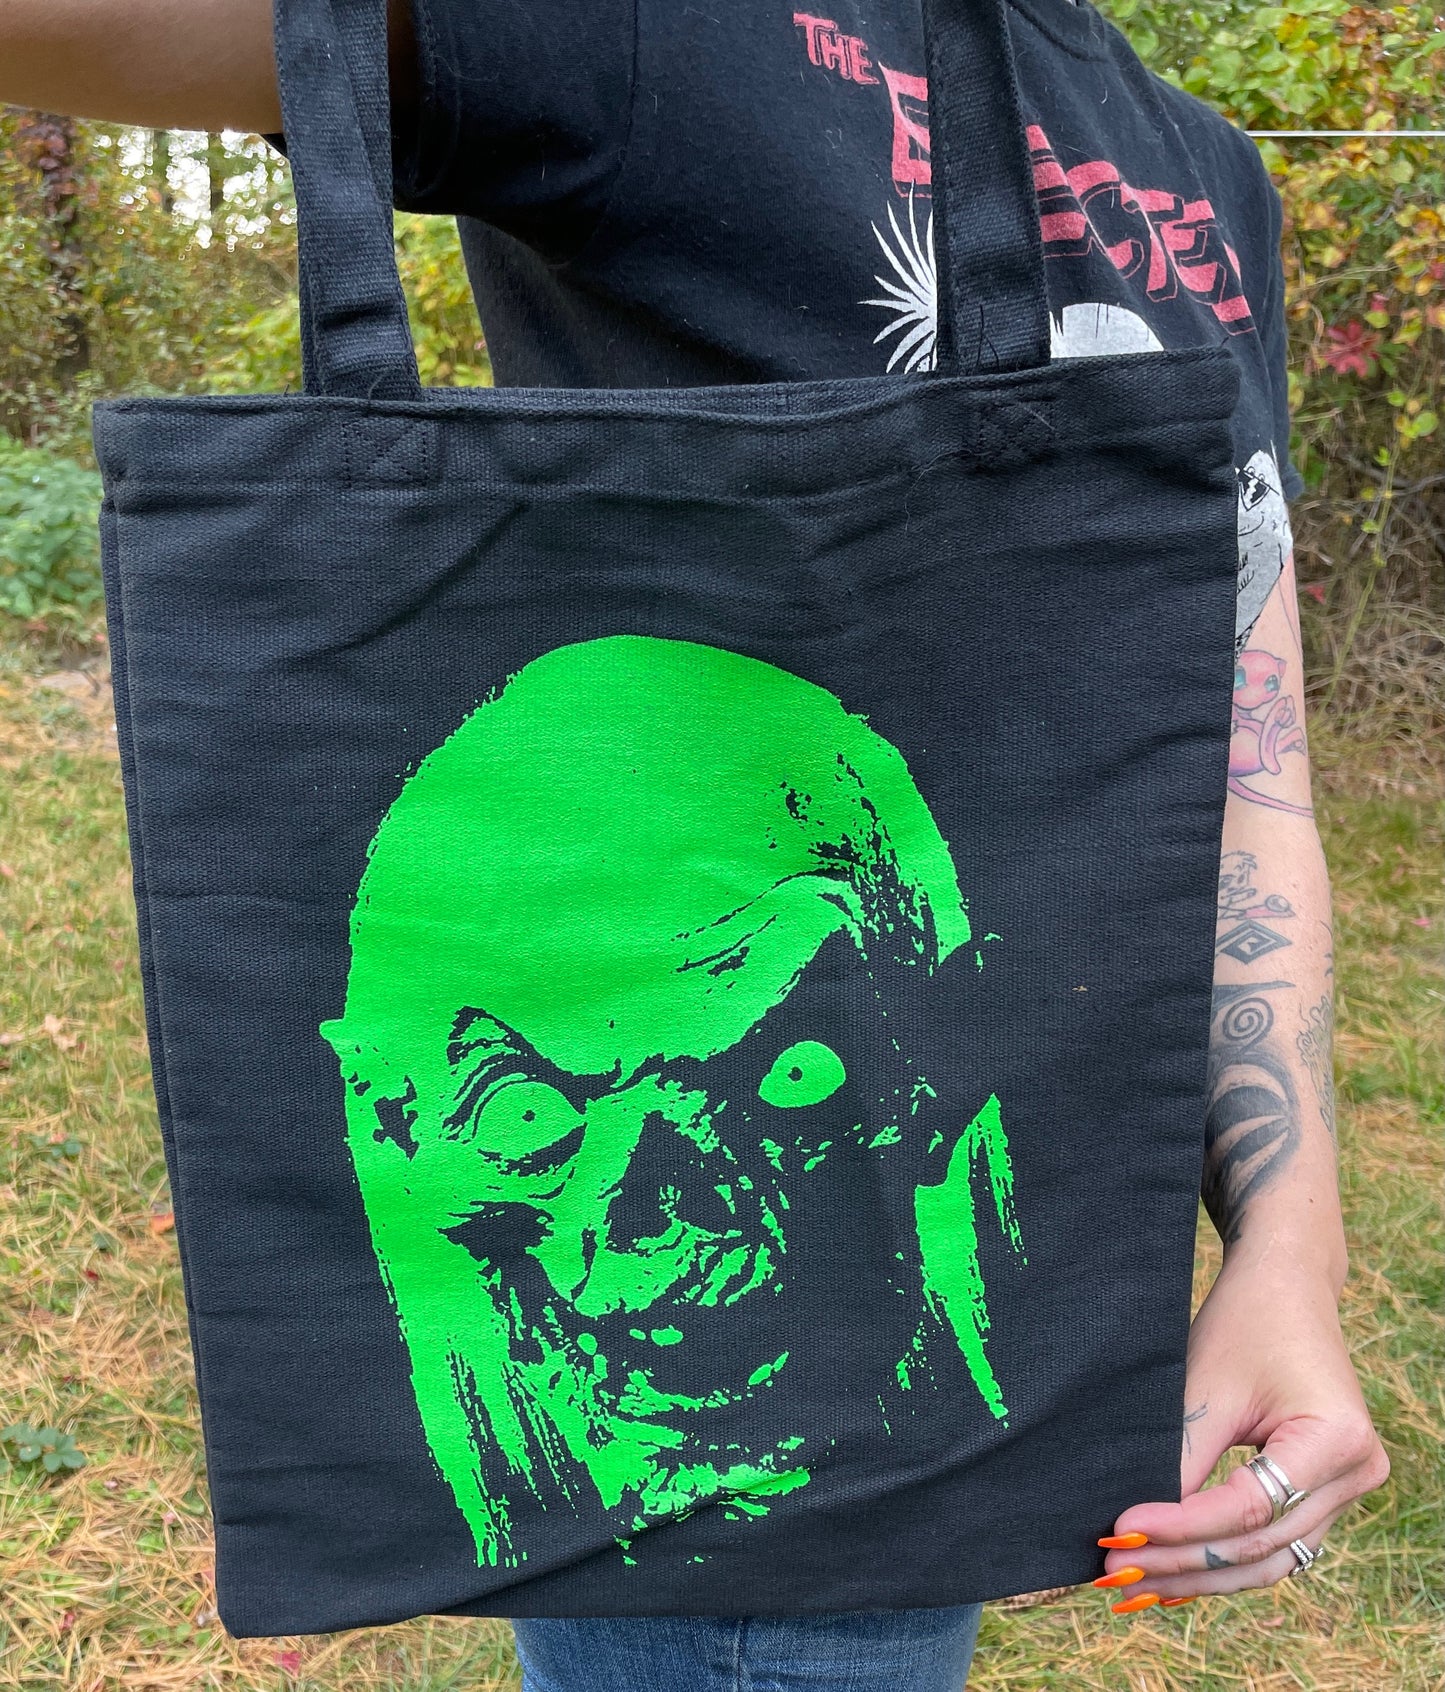 Tales from the Crypt Tote Bag